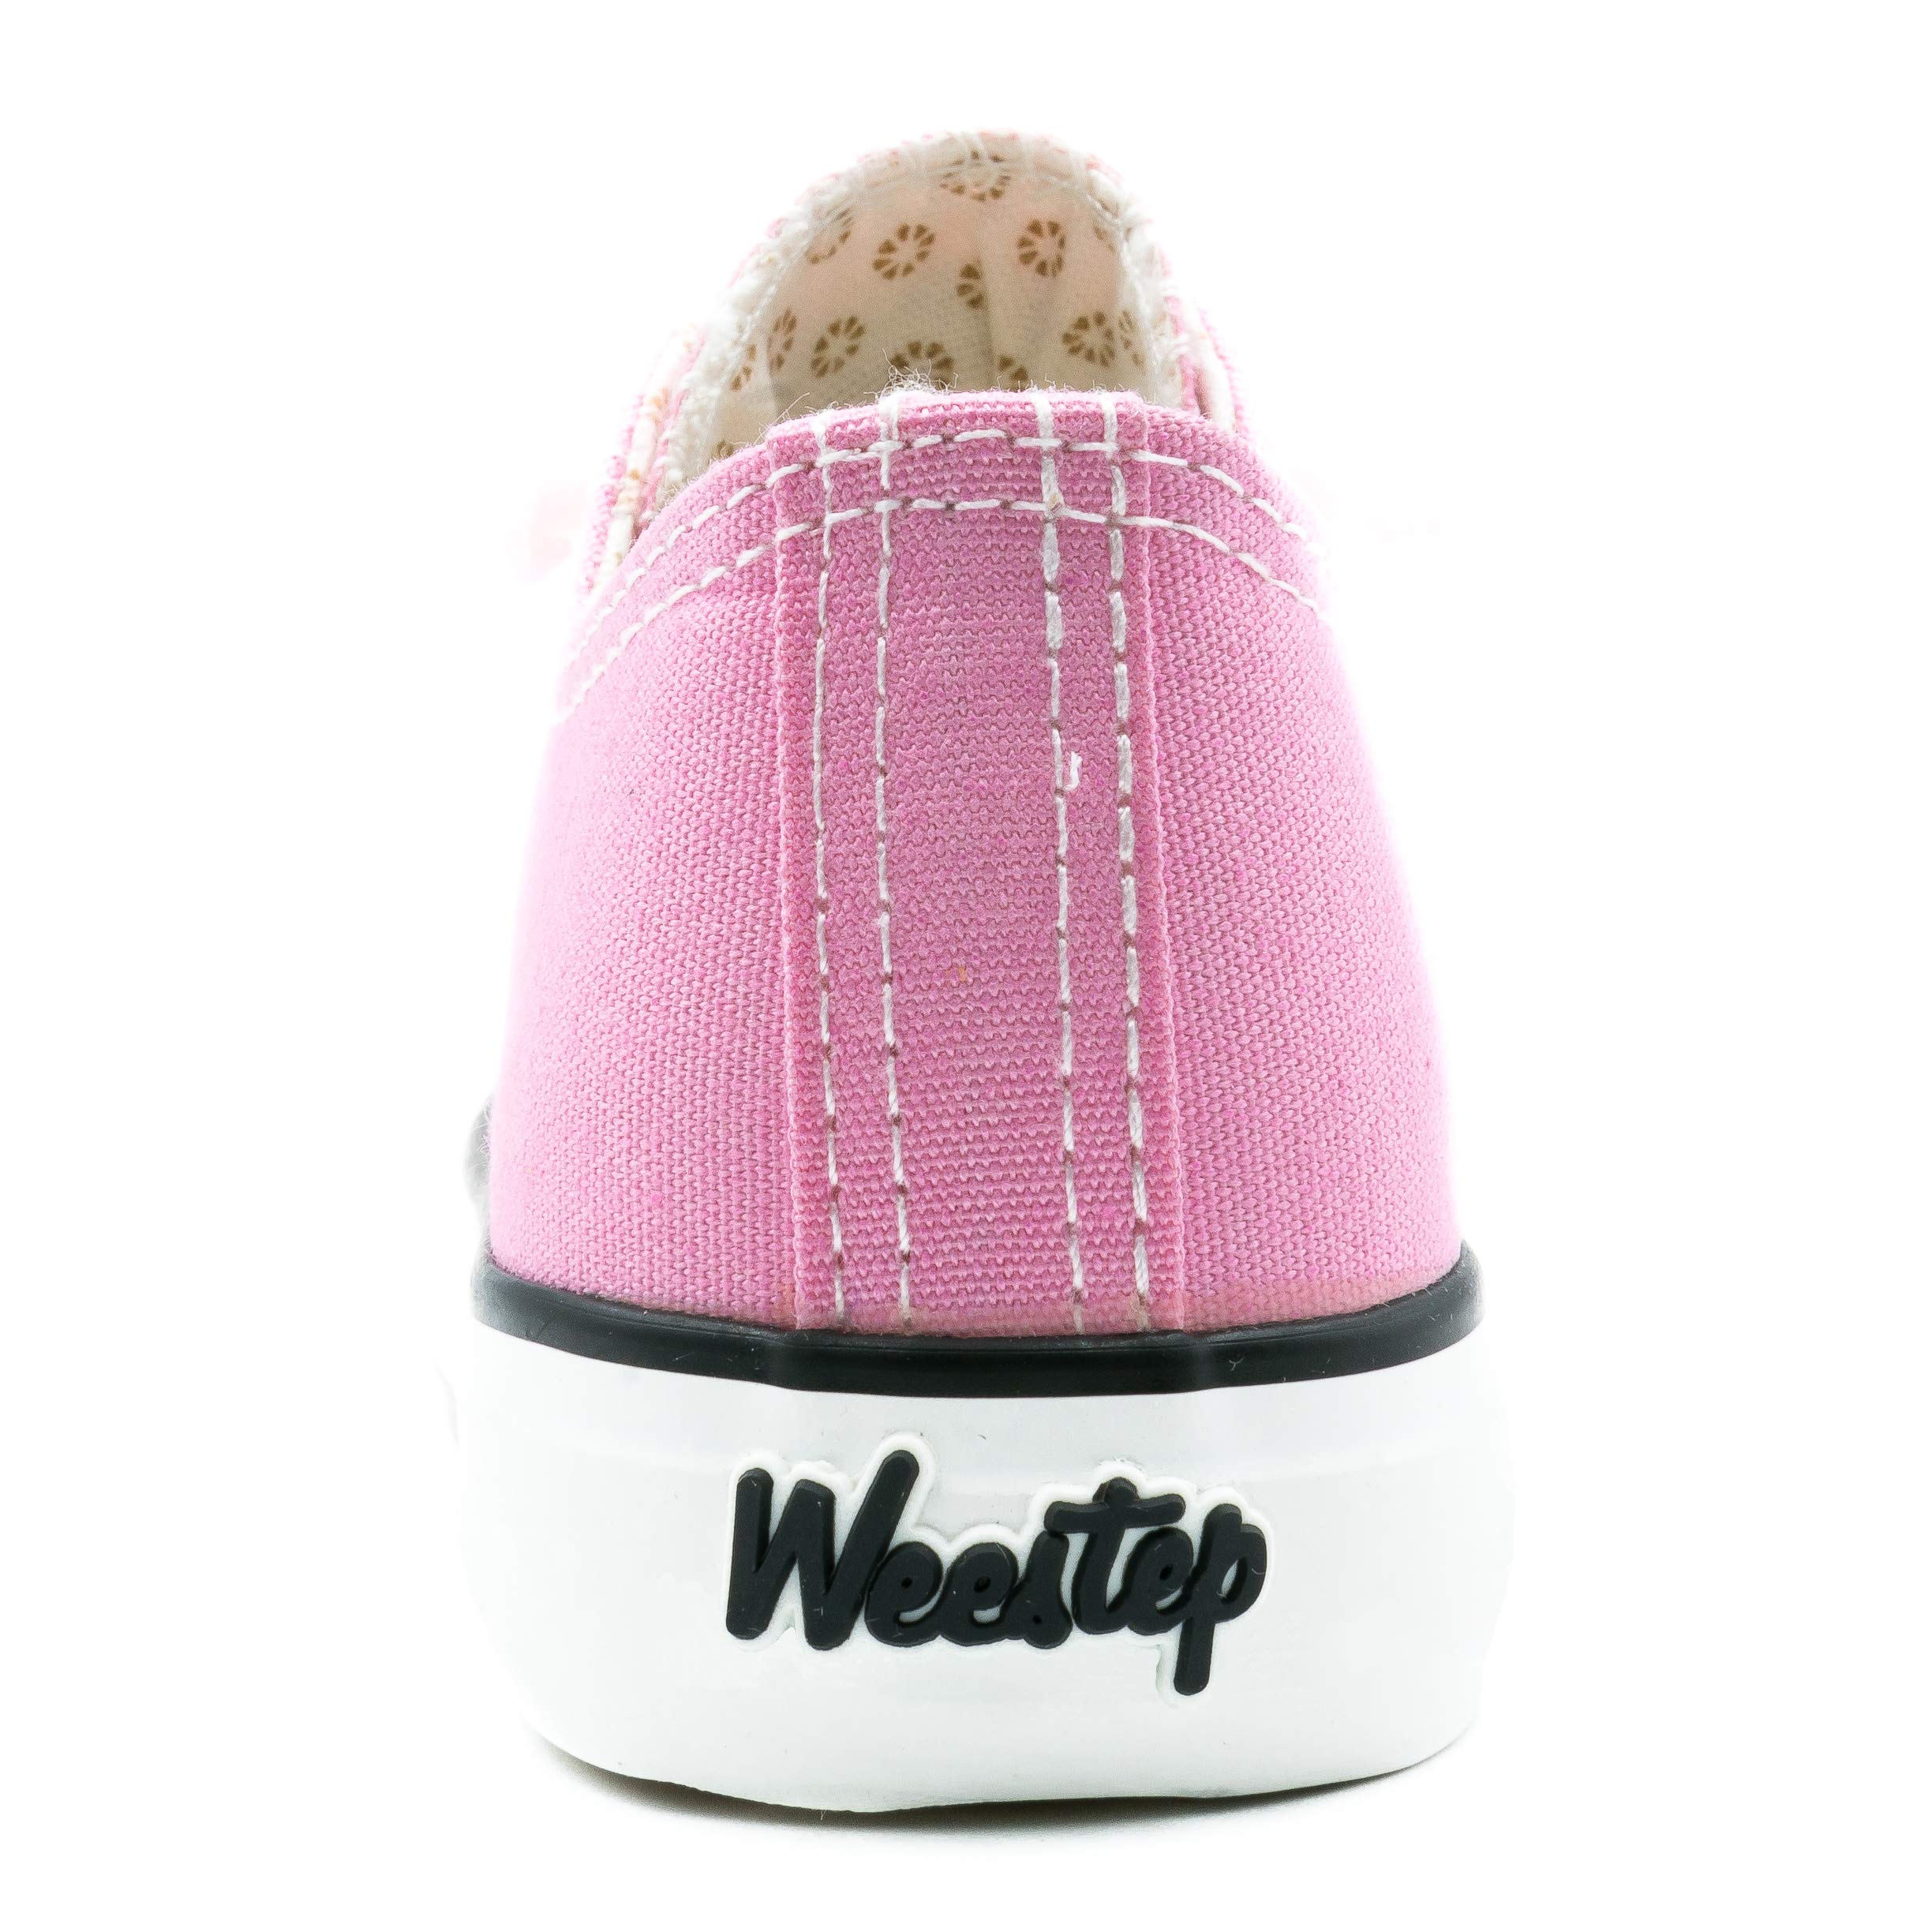 Weestep Toddler Little Kid Boys and Girls Slip On Sneakers(9 Toddler, Pink)